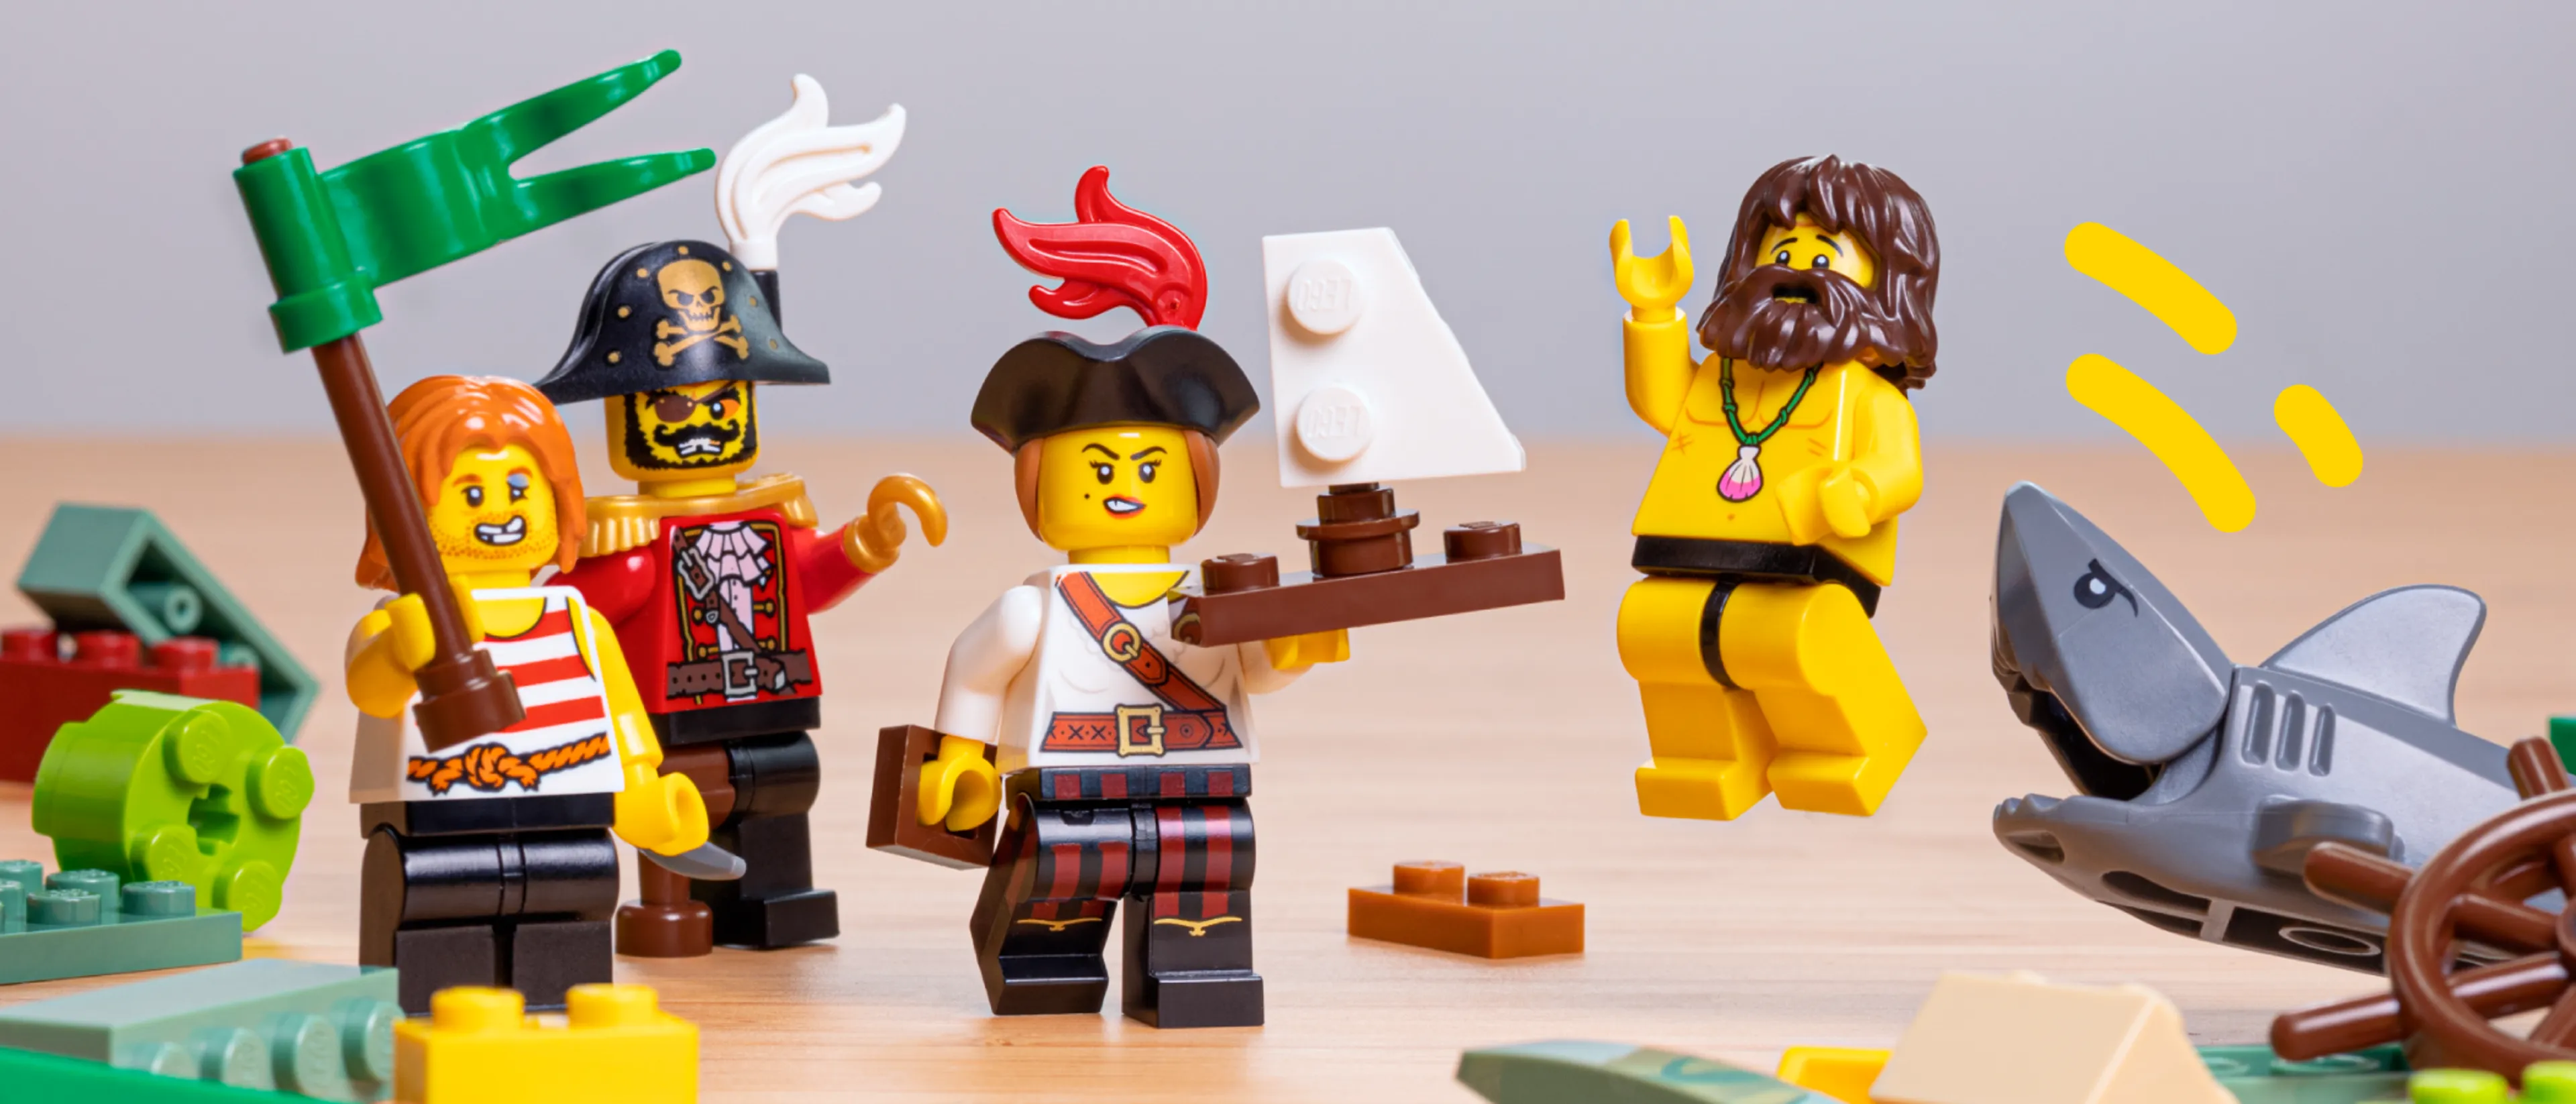 Minifigures holding up a ship